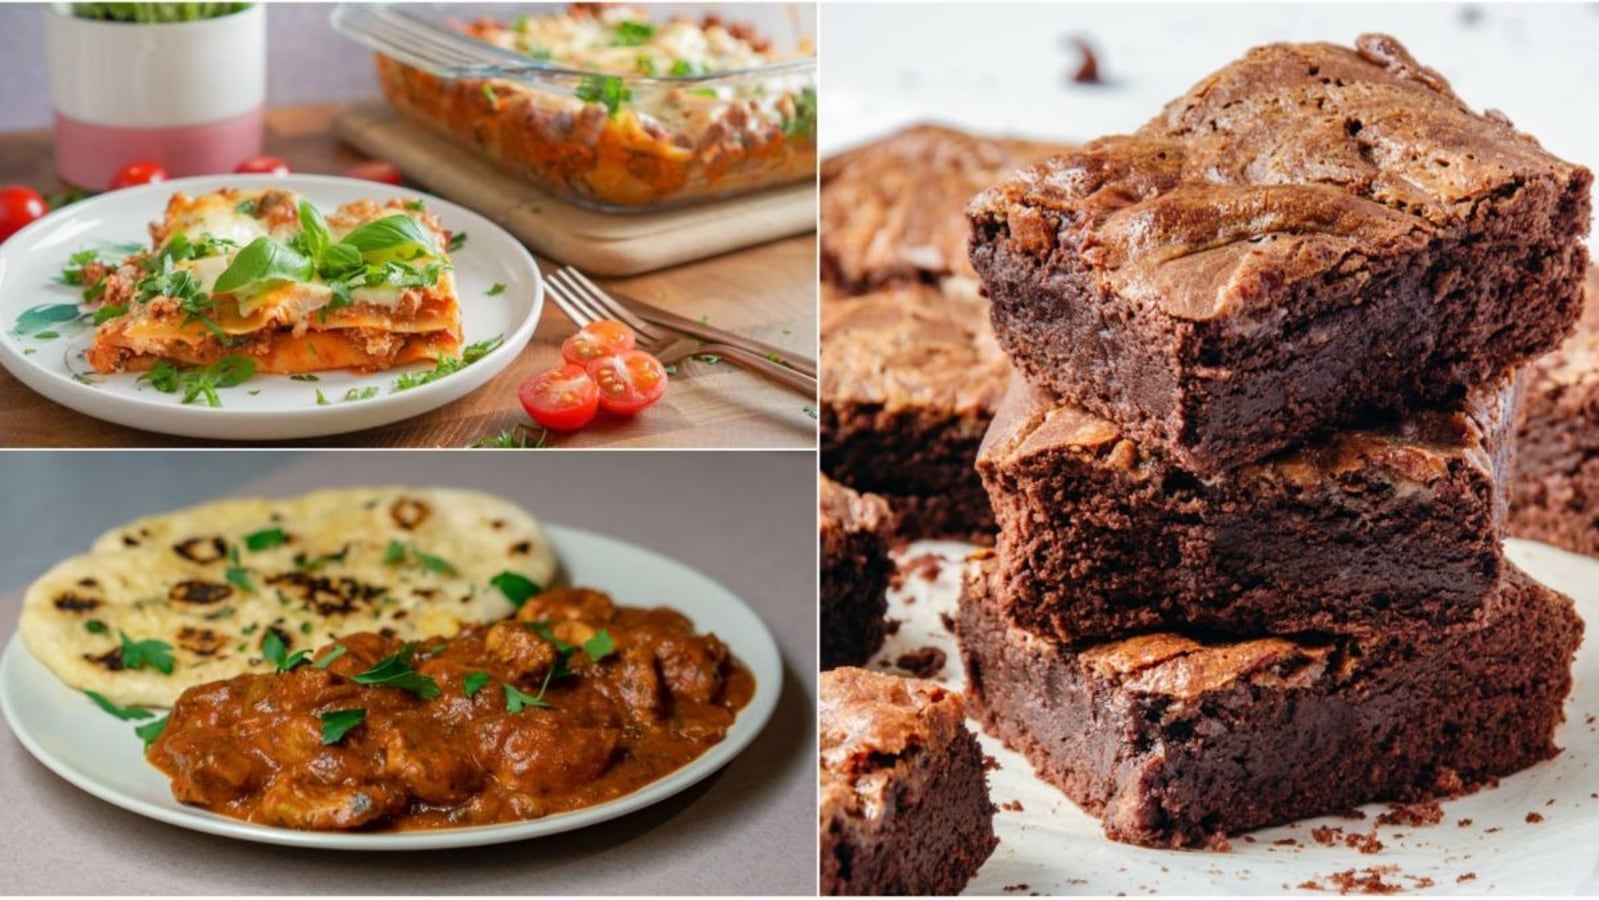 National Keto Day: 3 delicious and easy keto-friendly recipes you must try